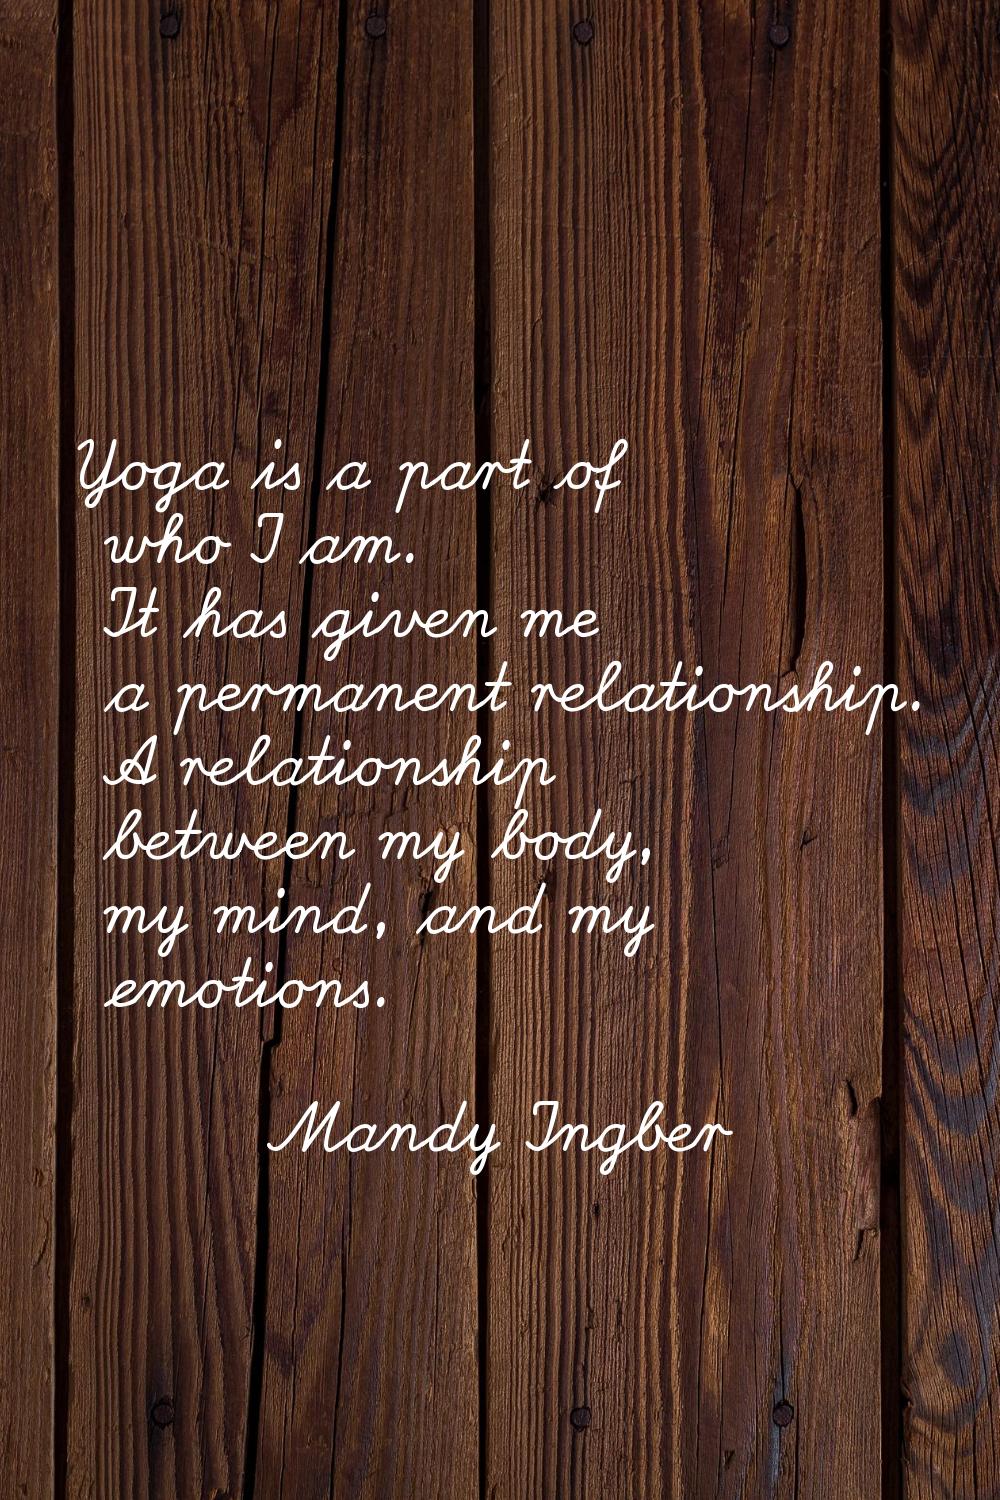 Yoga is a part of who I am. It has given me a permanent relationship. A relationship between my bod